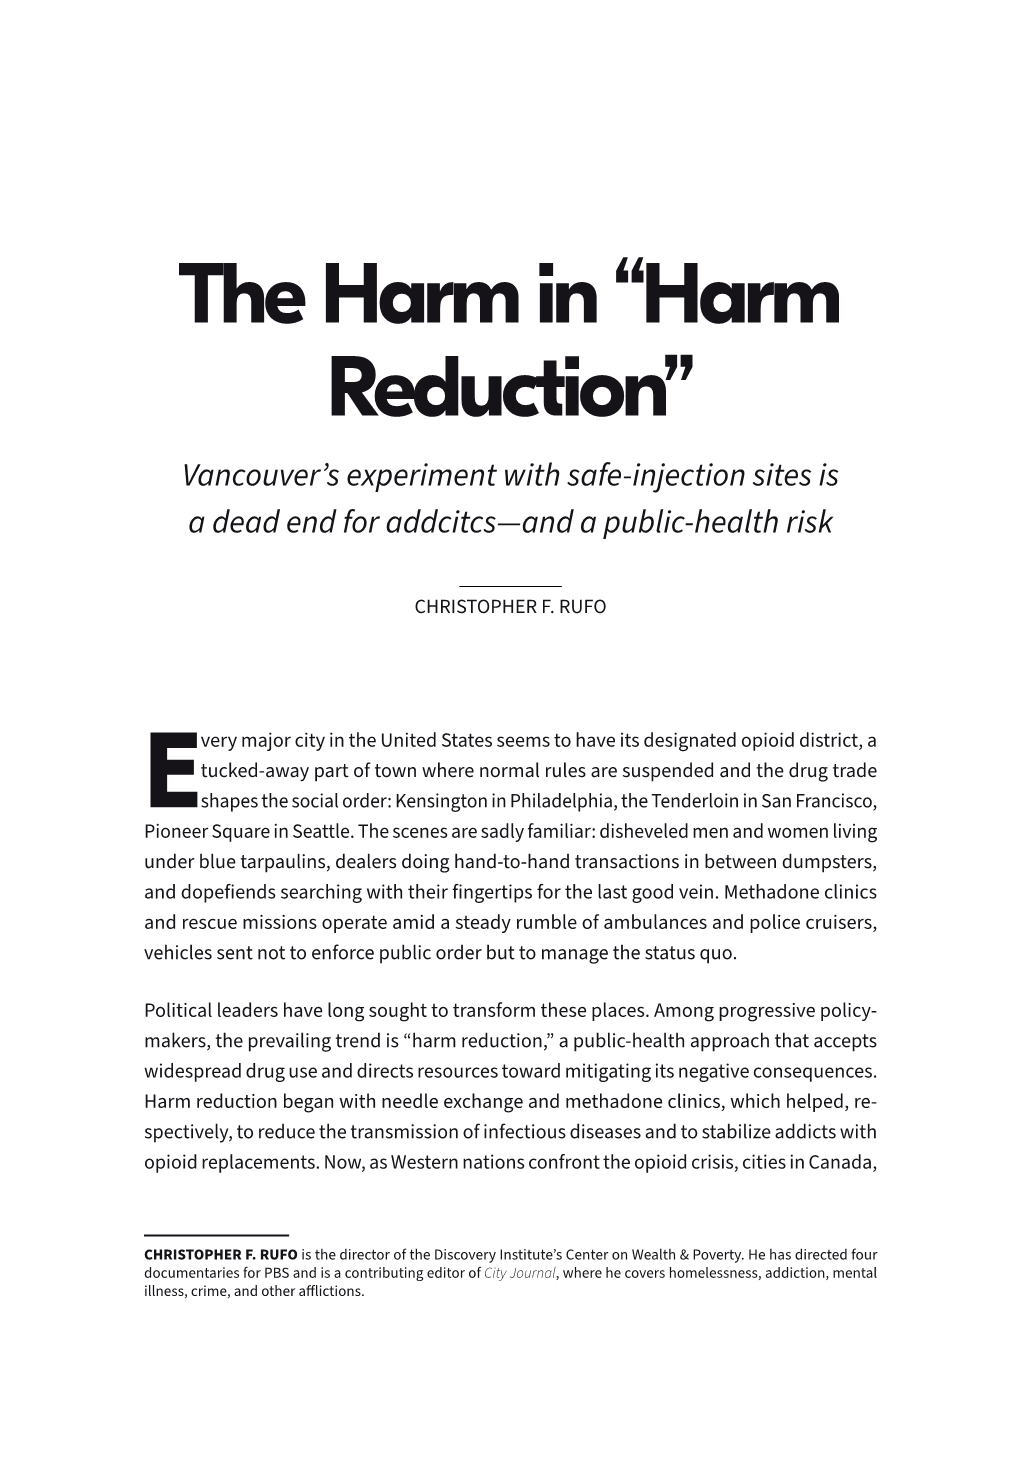 Harm Reduction” Vancouver’S Experiment with Safe-Injection Sites Is a Dead End for Addcitcs—And a Public-Health Risk